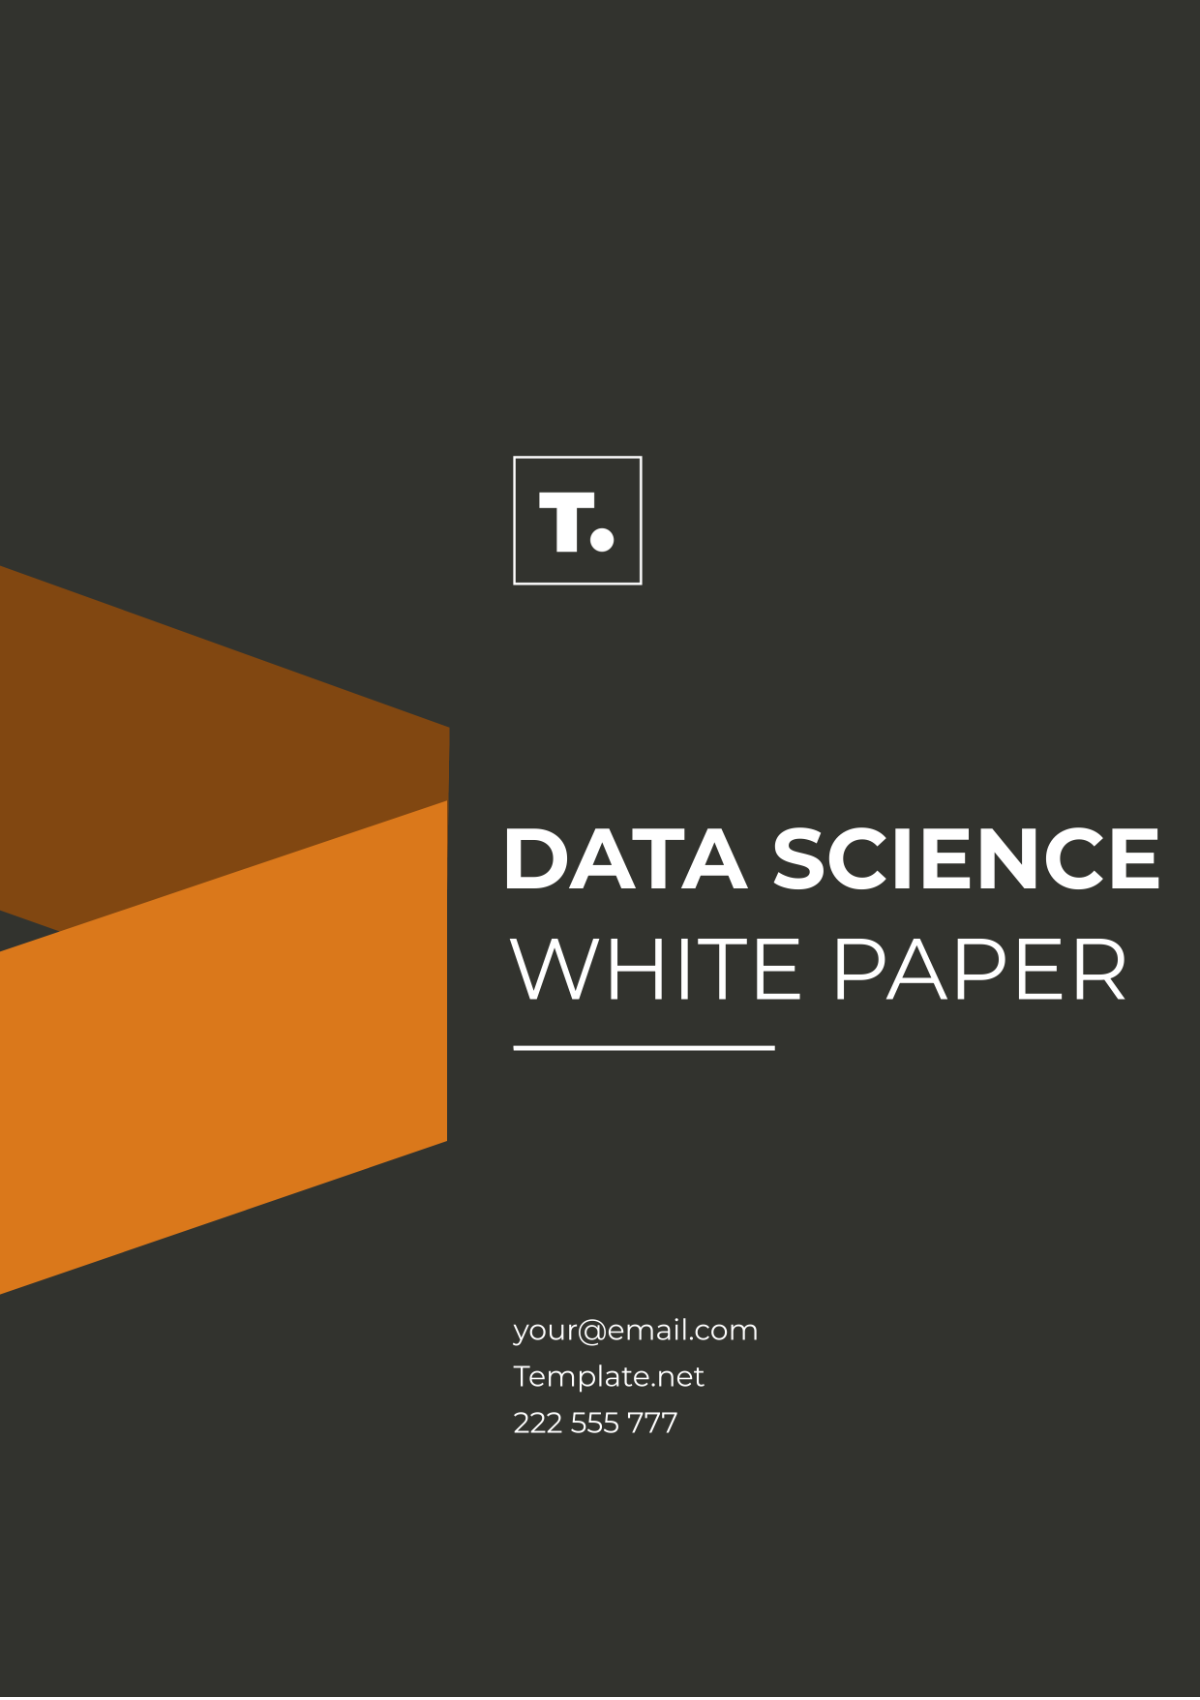 Data Science White Paper Template